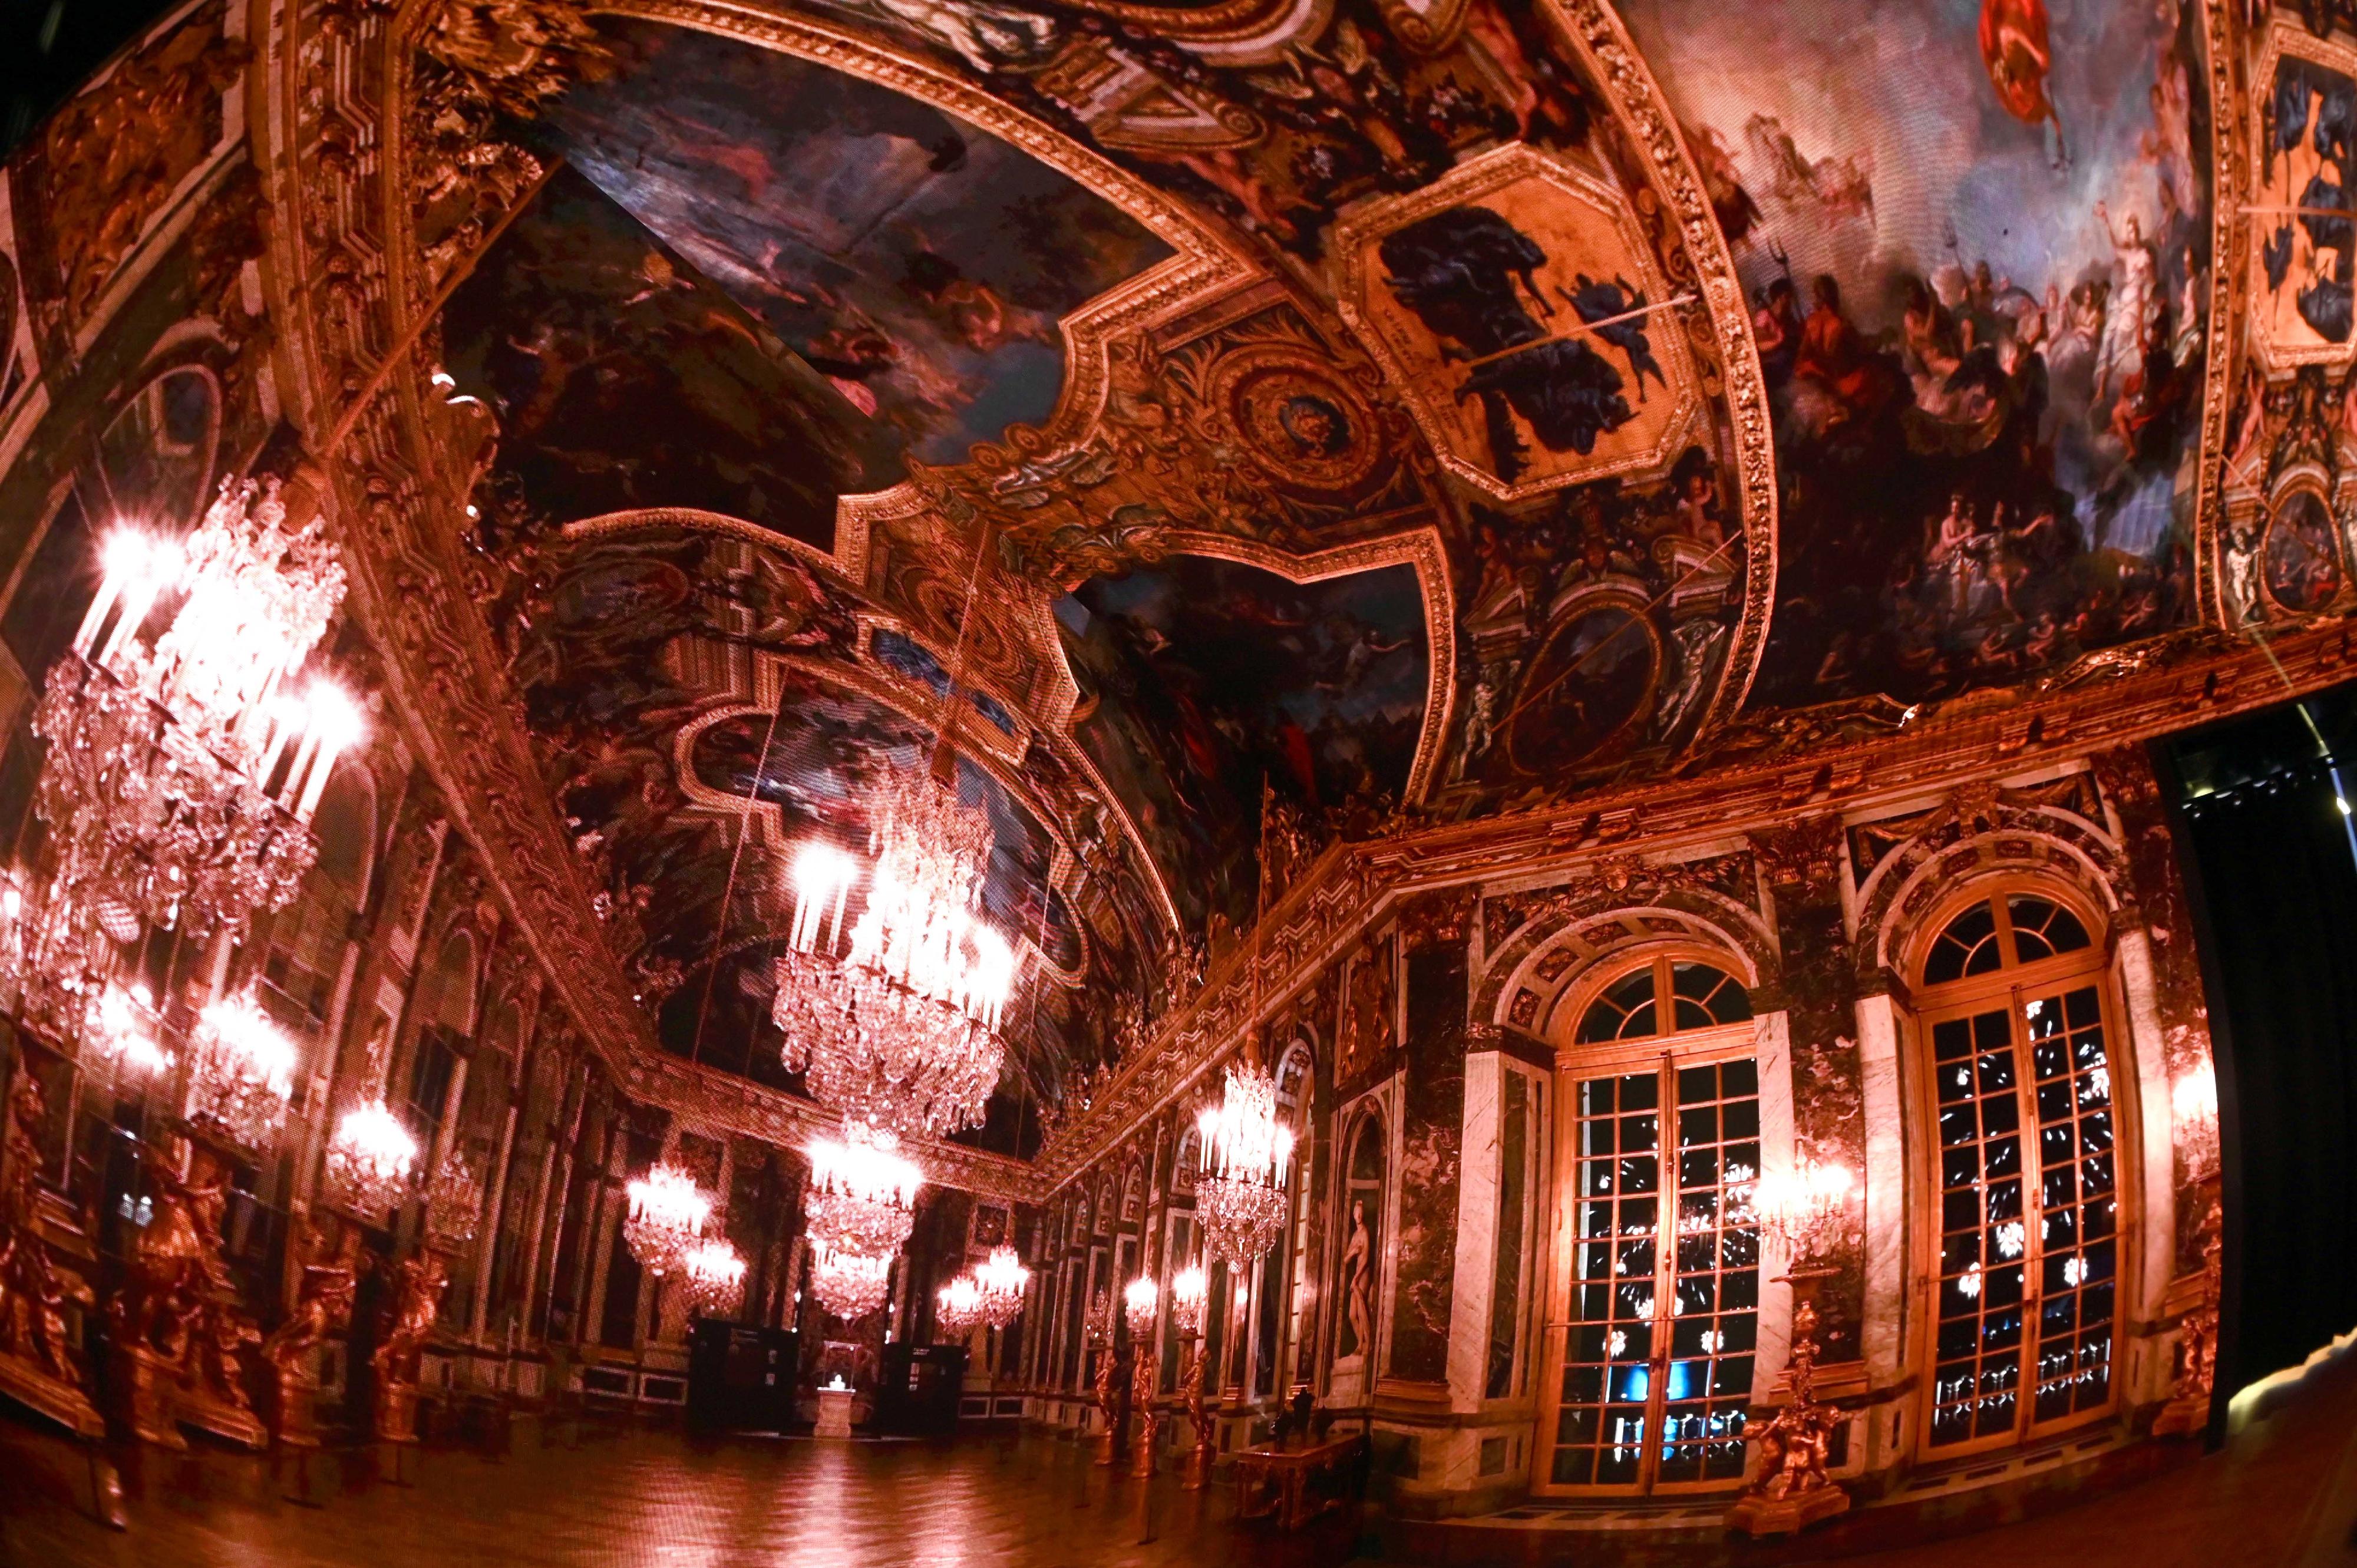 The opening ceremony for the exhibition "Virtually Versailles" was held today (April 19) at the Hong Kong Heritage Museum. Photo shows a 360-degree LED room displaying the majestic grandeur of the Palace of Versailles with a virtual view of the Hall of Mirrors, the Gallery of Battles, the Mercury Room, the Venus Room and the Royal Opera House.